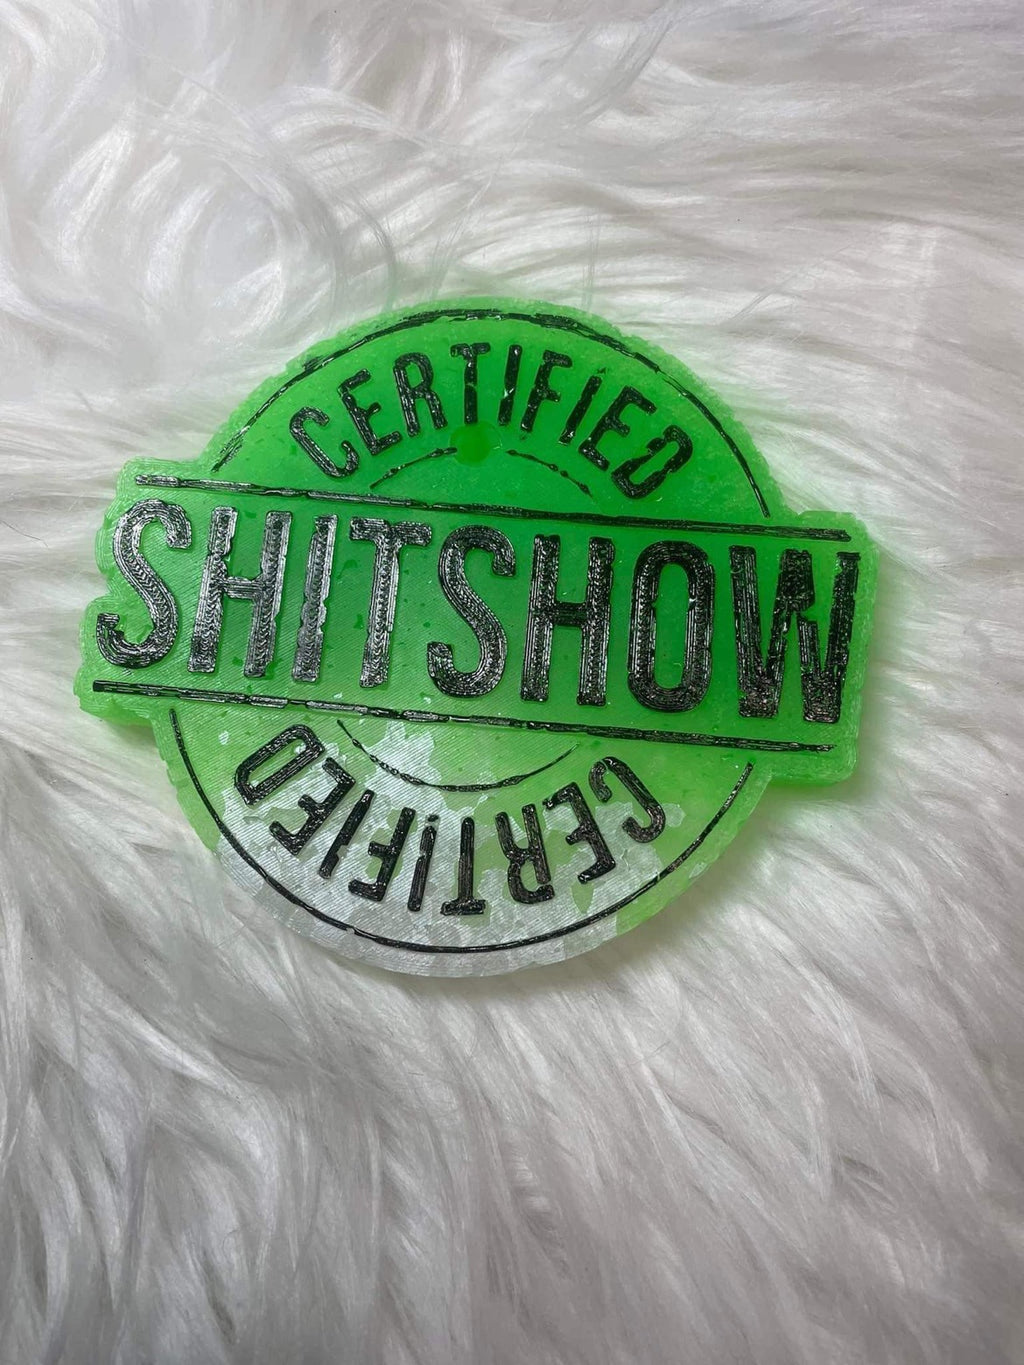 Certified S show